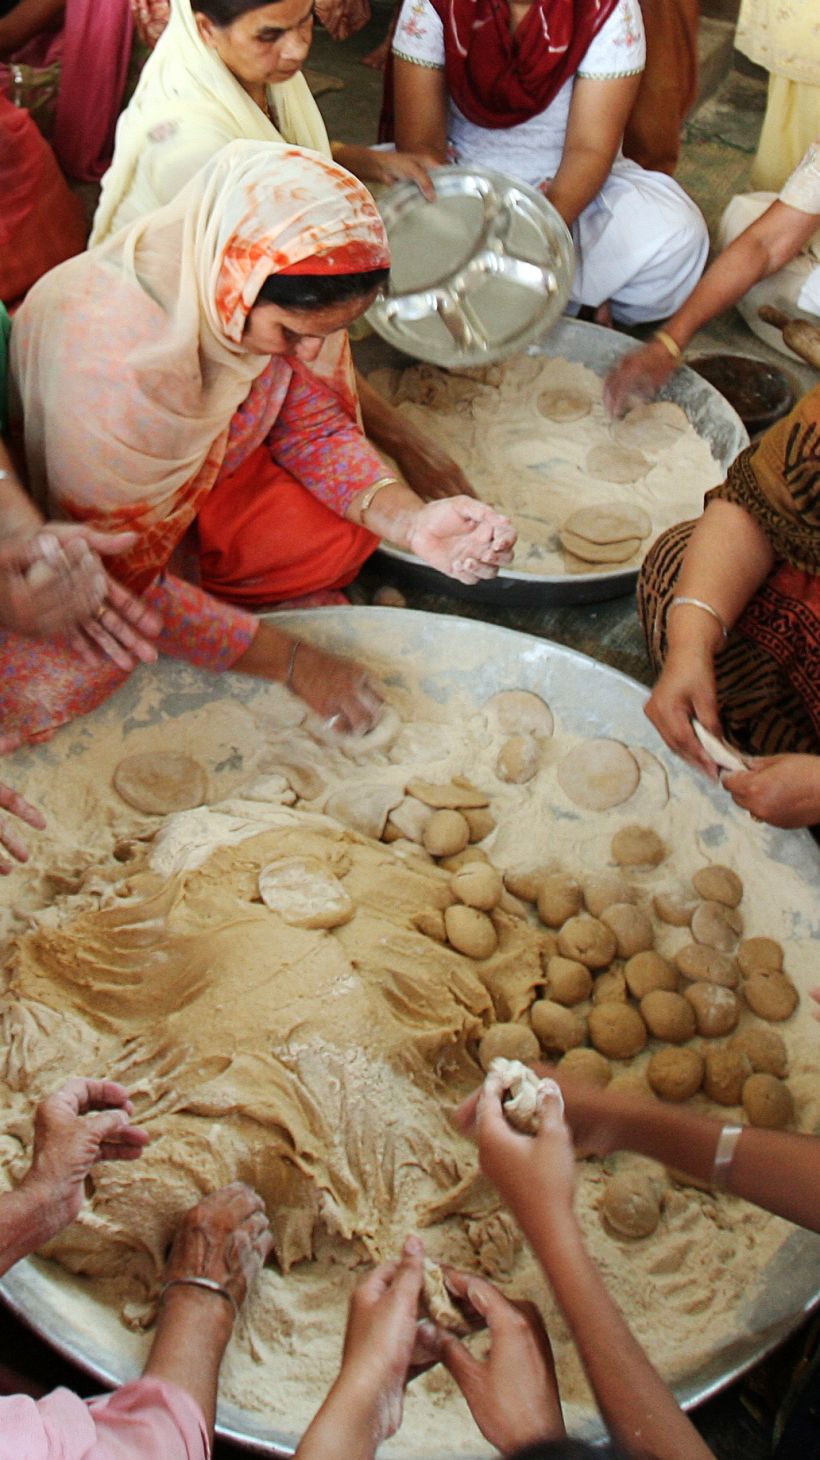 Devotees make chapattis (bread) at a community kitchen in a Gurdwara (Sikh temple) on Baisakhi festival in the northern India city of Chandigarh